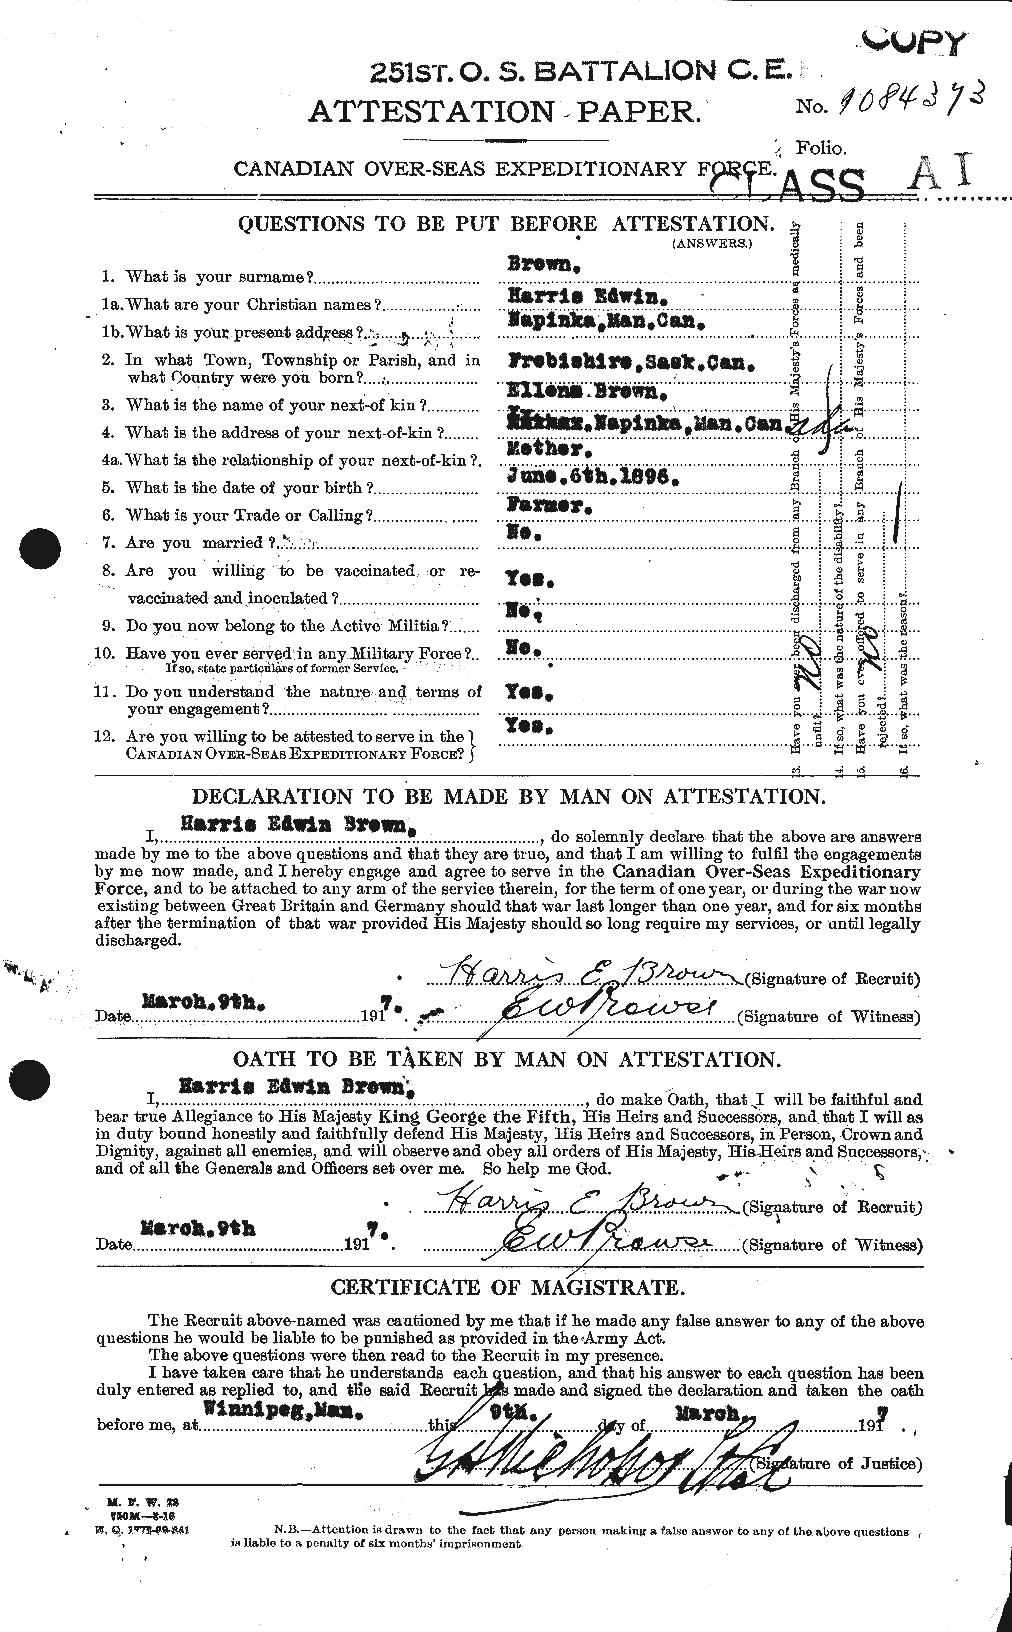 Personnel Records of the First World War - CEF 265379a